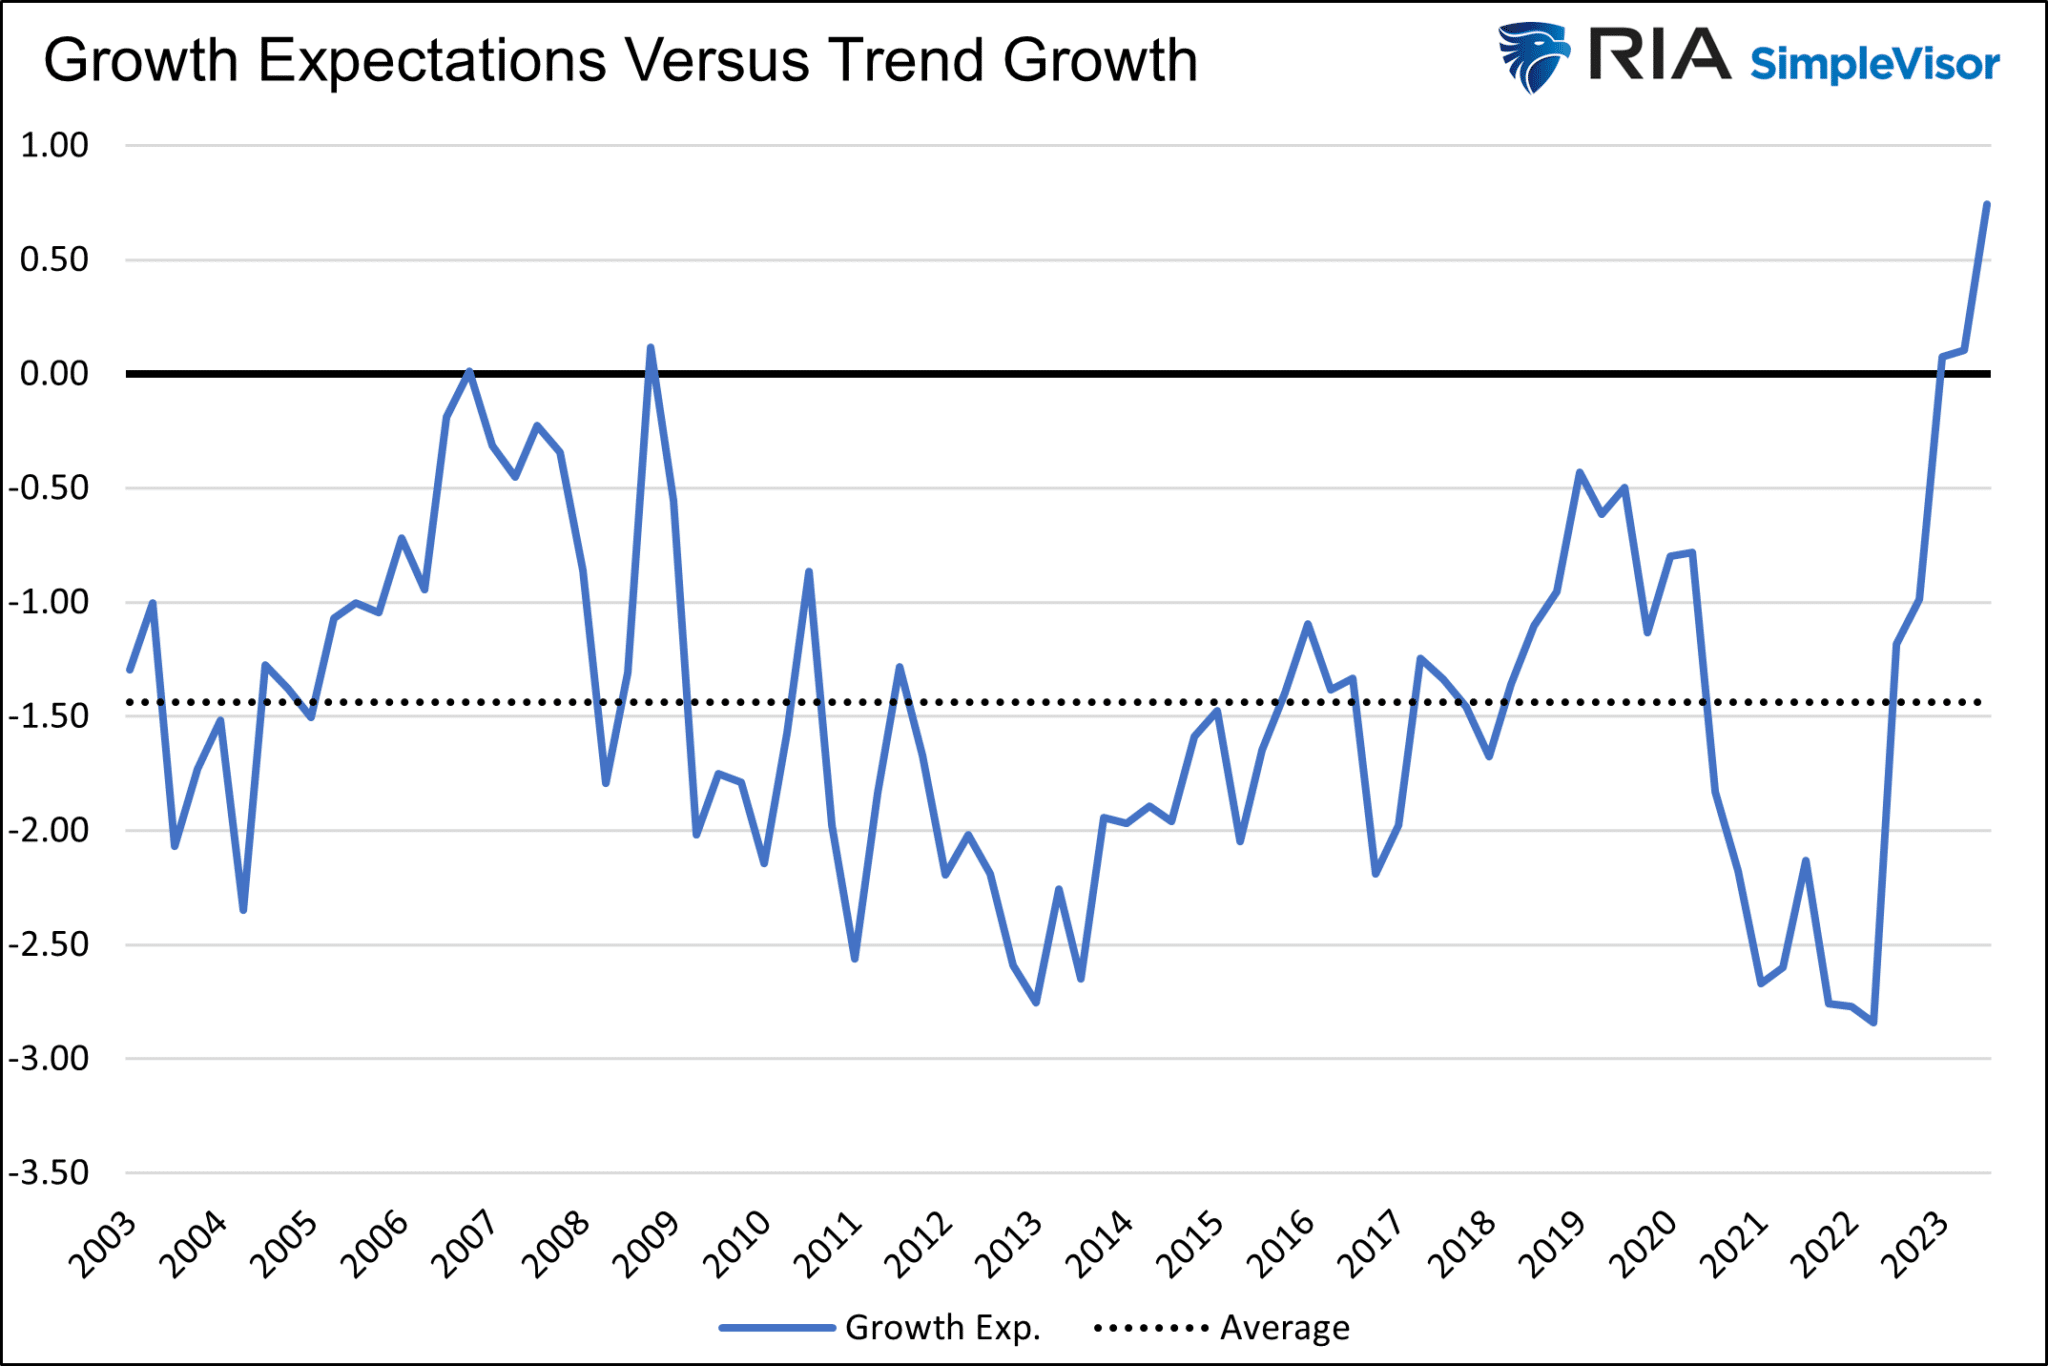 Growth Expectations vs Trend Growth